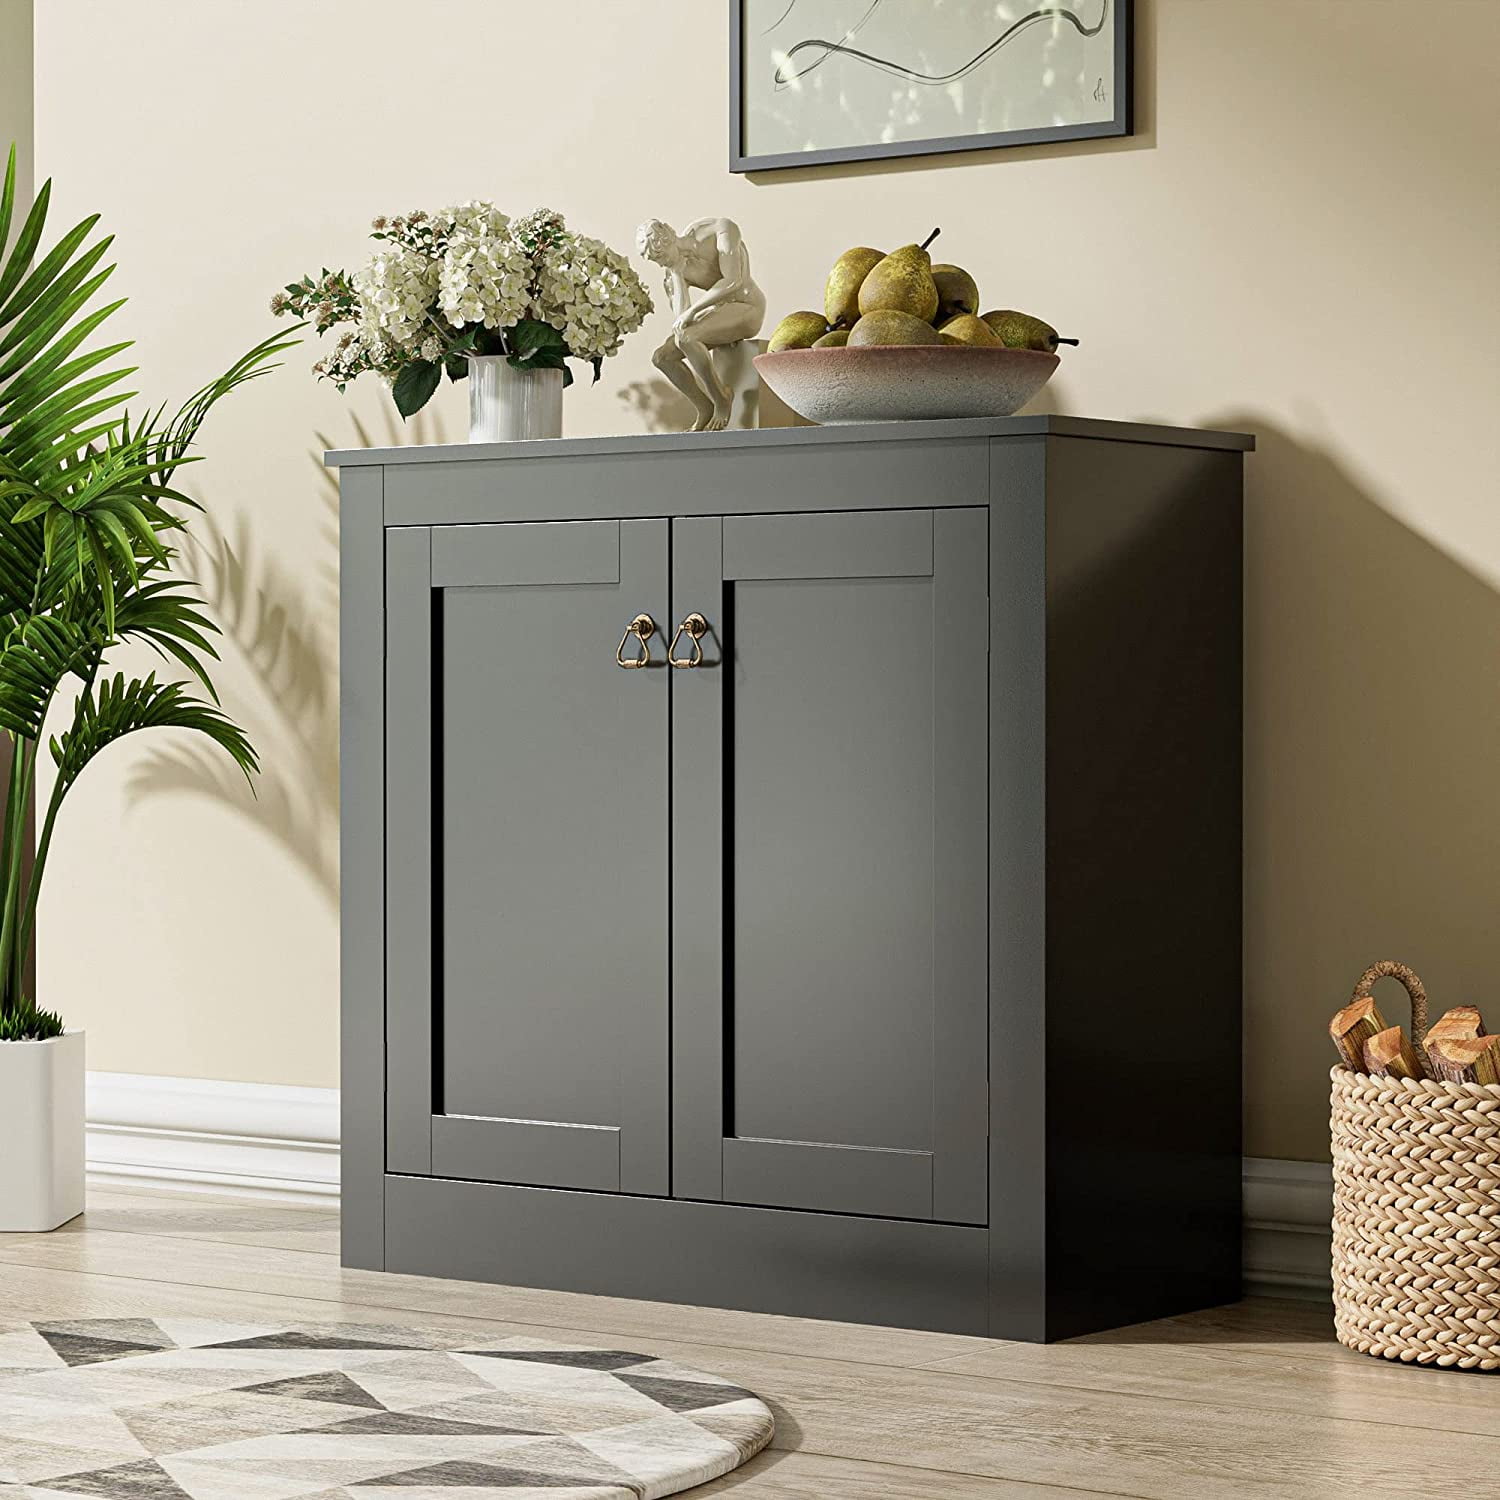 Cozy Castle Storage Cabinet,, Accent Cabinet with Doors and Shelves ...